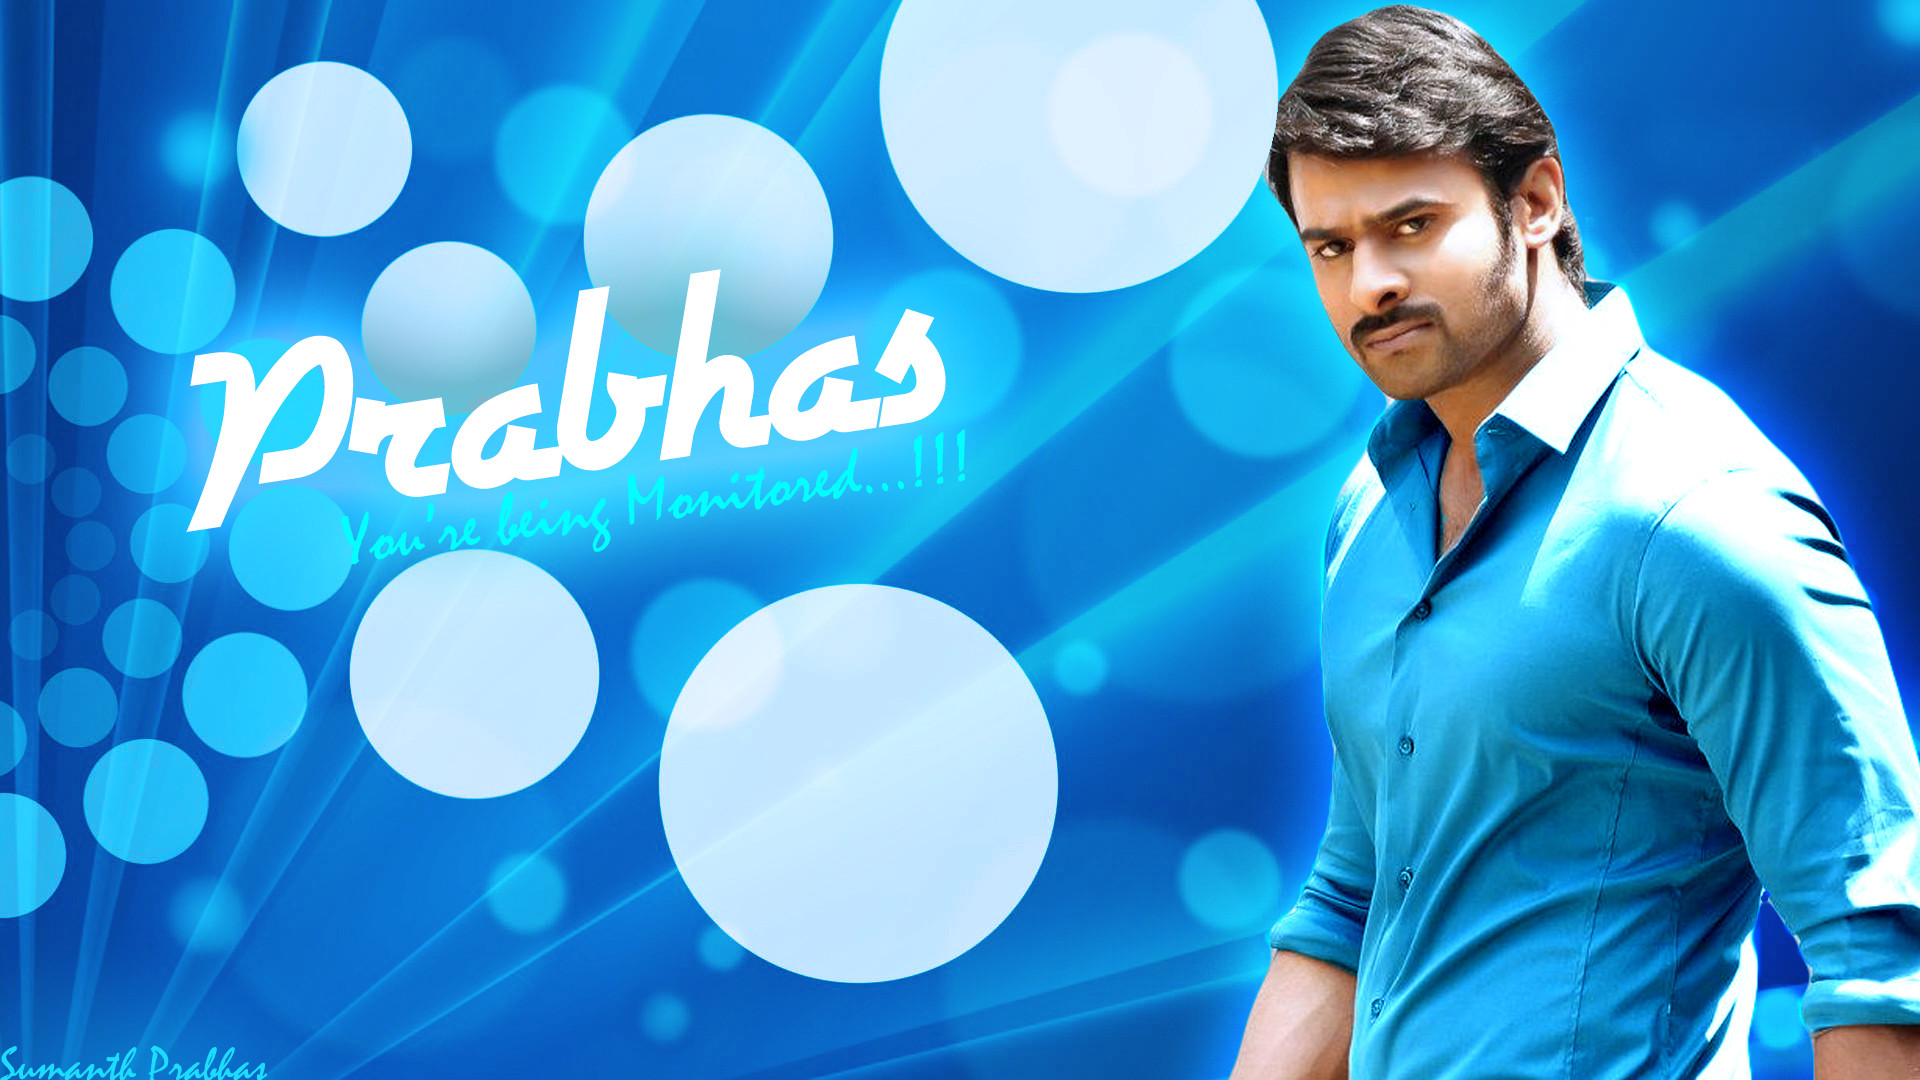 Prabhas Hd Wallpapers For Pc - 1920x1080 Wallpaper 